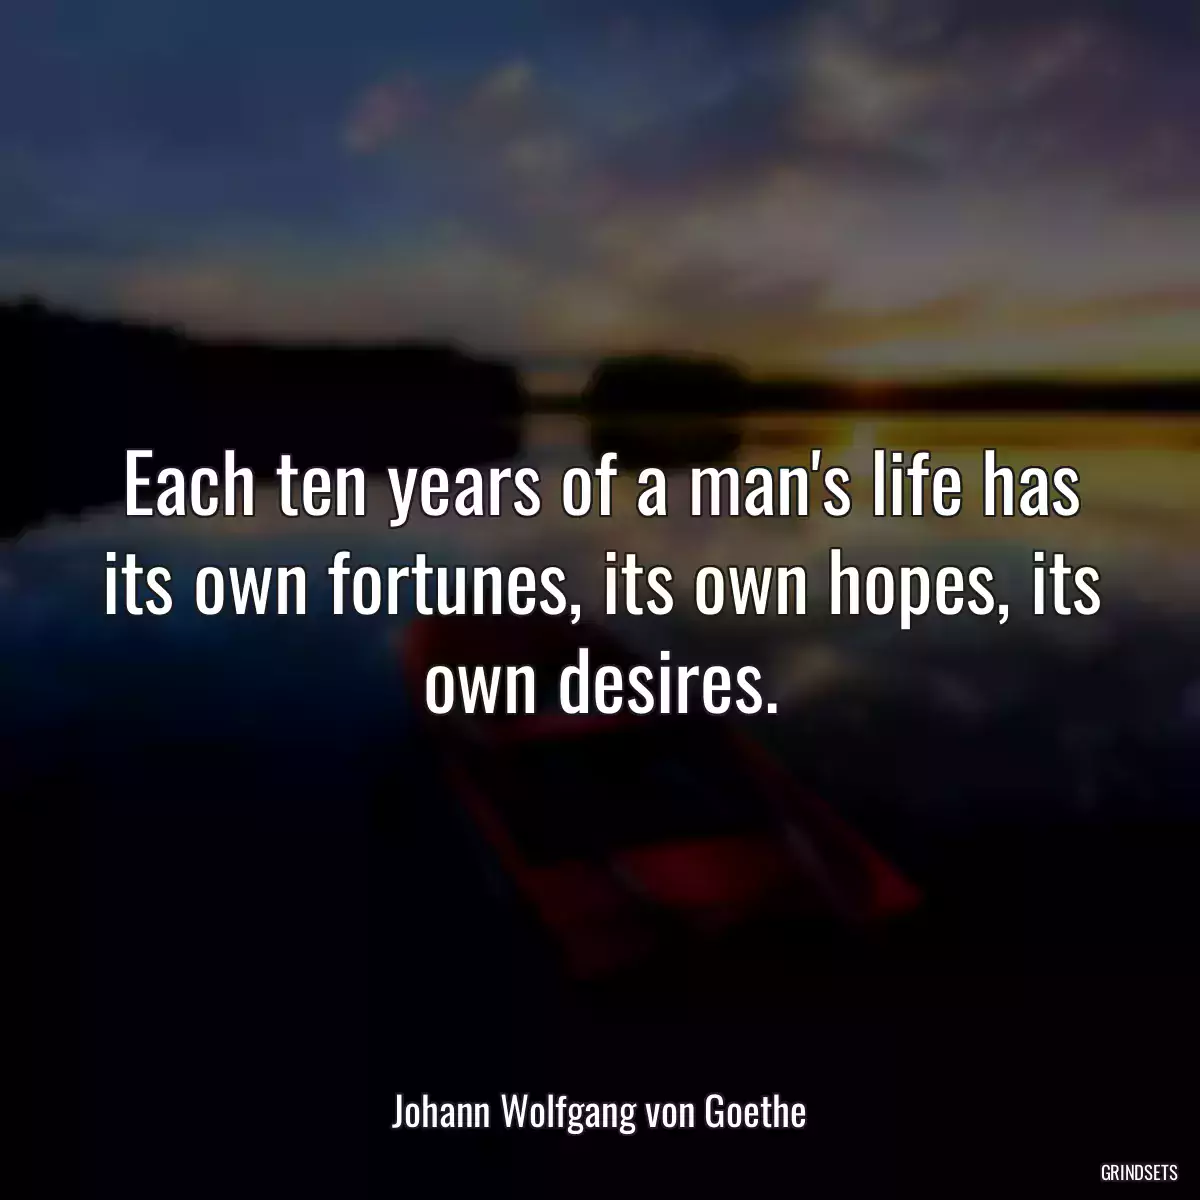 Each ten years of a man\'s life has its own fortunes, its own hopes, its own desires.